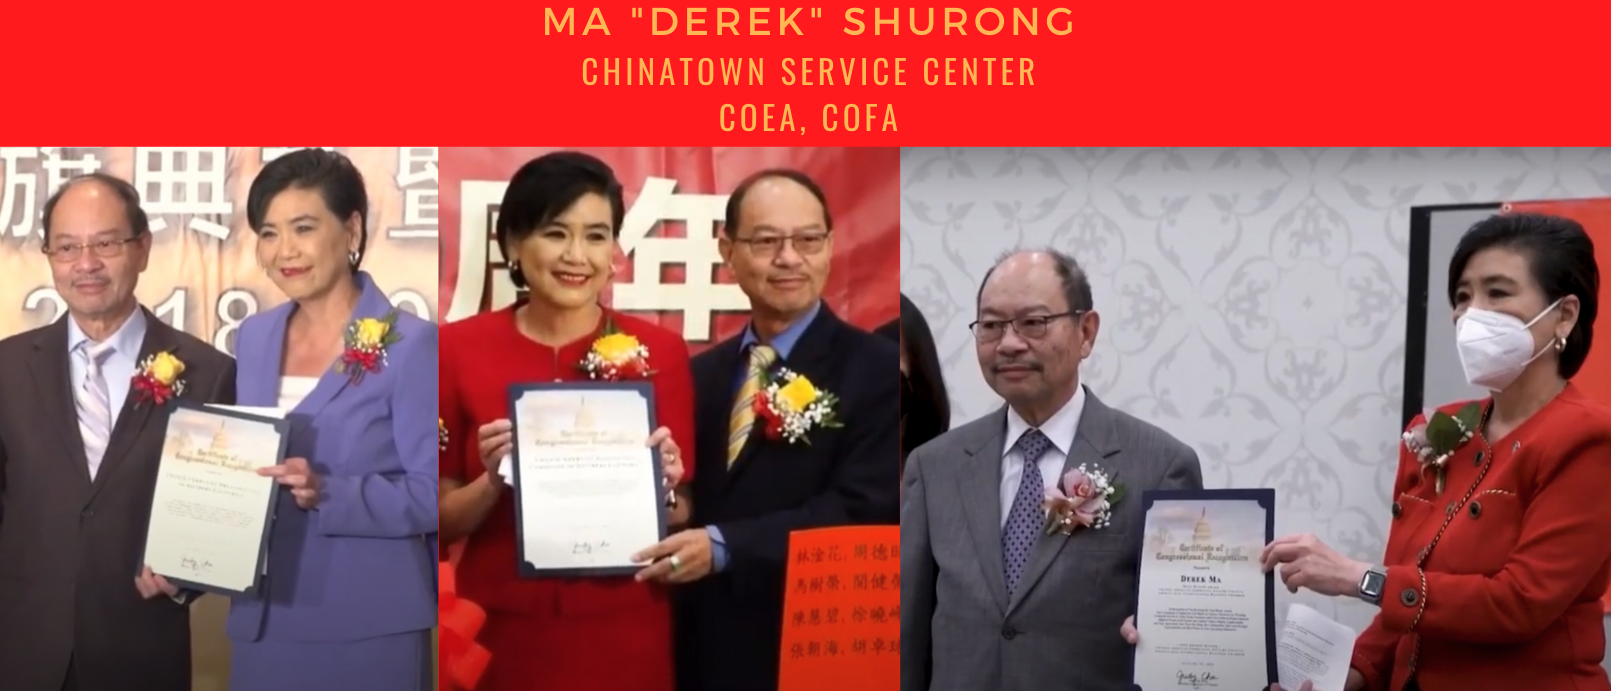 Rep. Judy Chu has awarded five Certificates of Congressional Recognition to Ma "Derek" Shurong, who's belonged to alleged Chinese intel front groups including the China Overseas Exchange Association and the China Overseas Friendship Association. Image created by the Daily Caller News Foundation. 